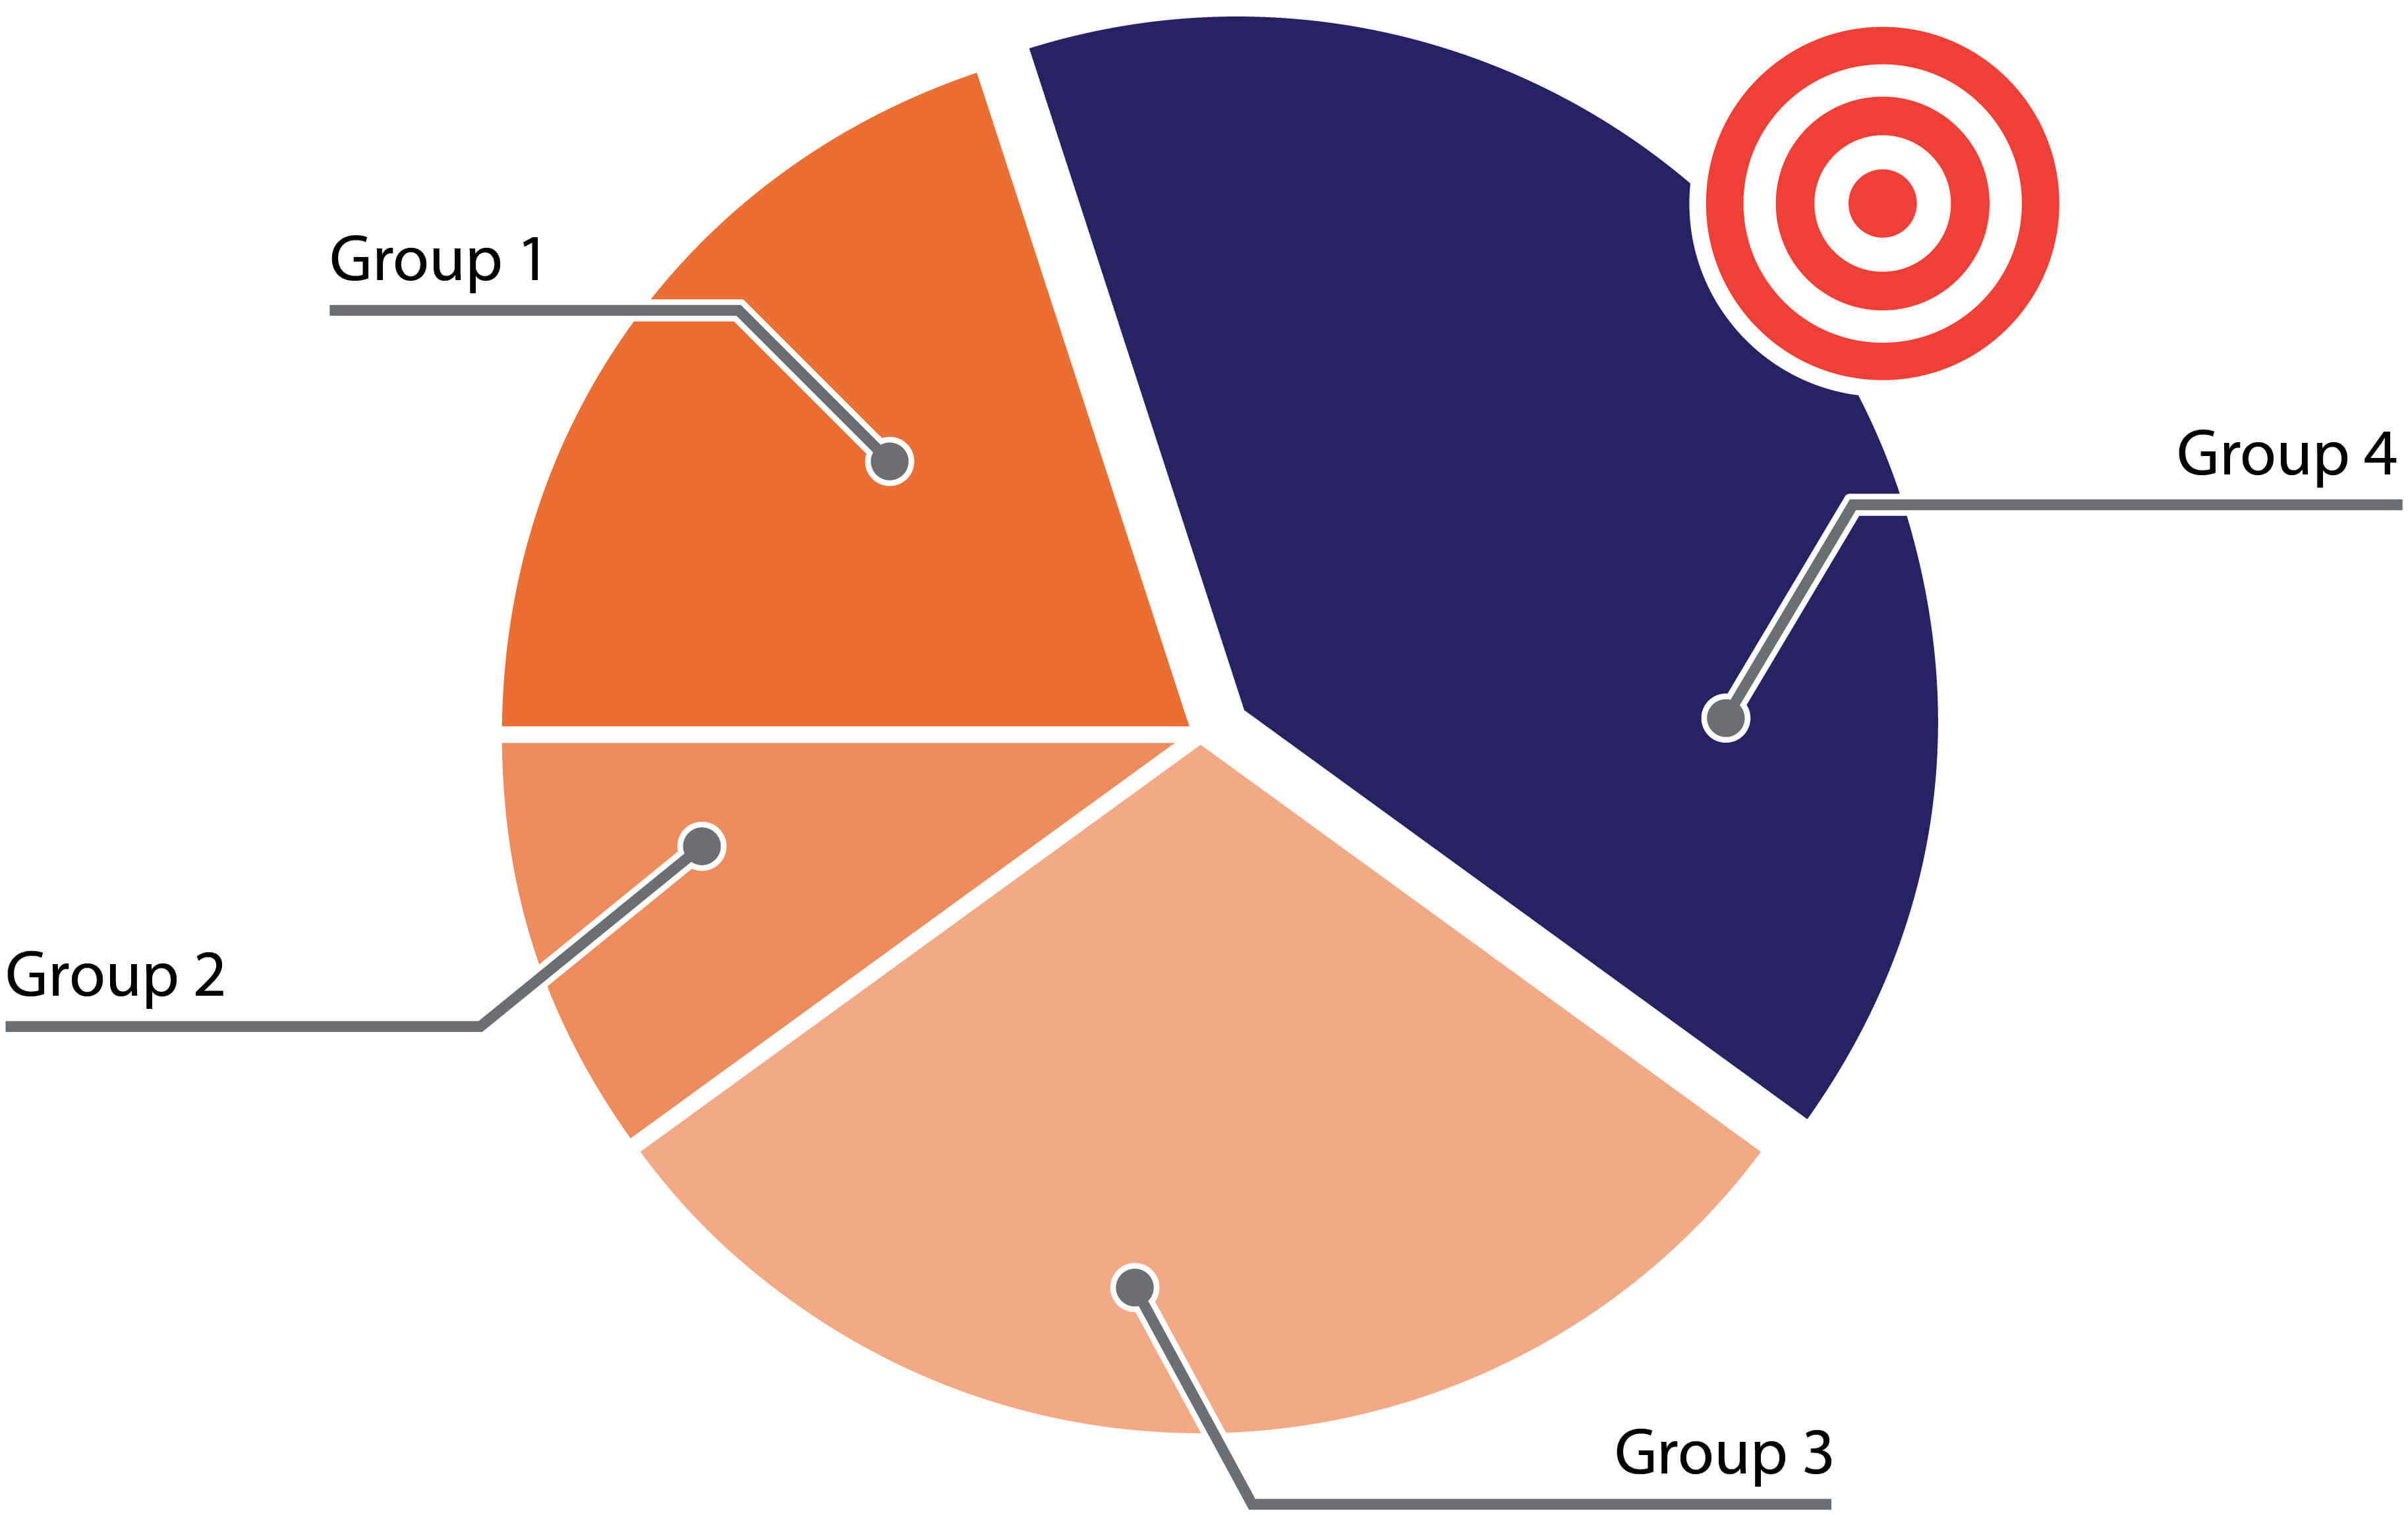 A pie graph with 4 groups of audiences, labelled 'Group 1' to 'Group 4'. Group 4 has a bullseye goal icon on it.